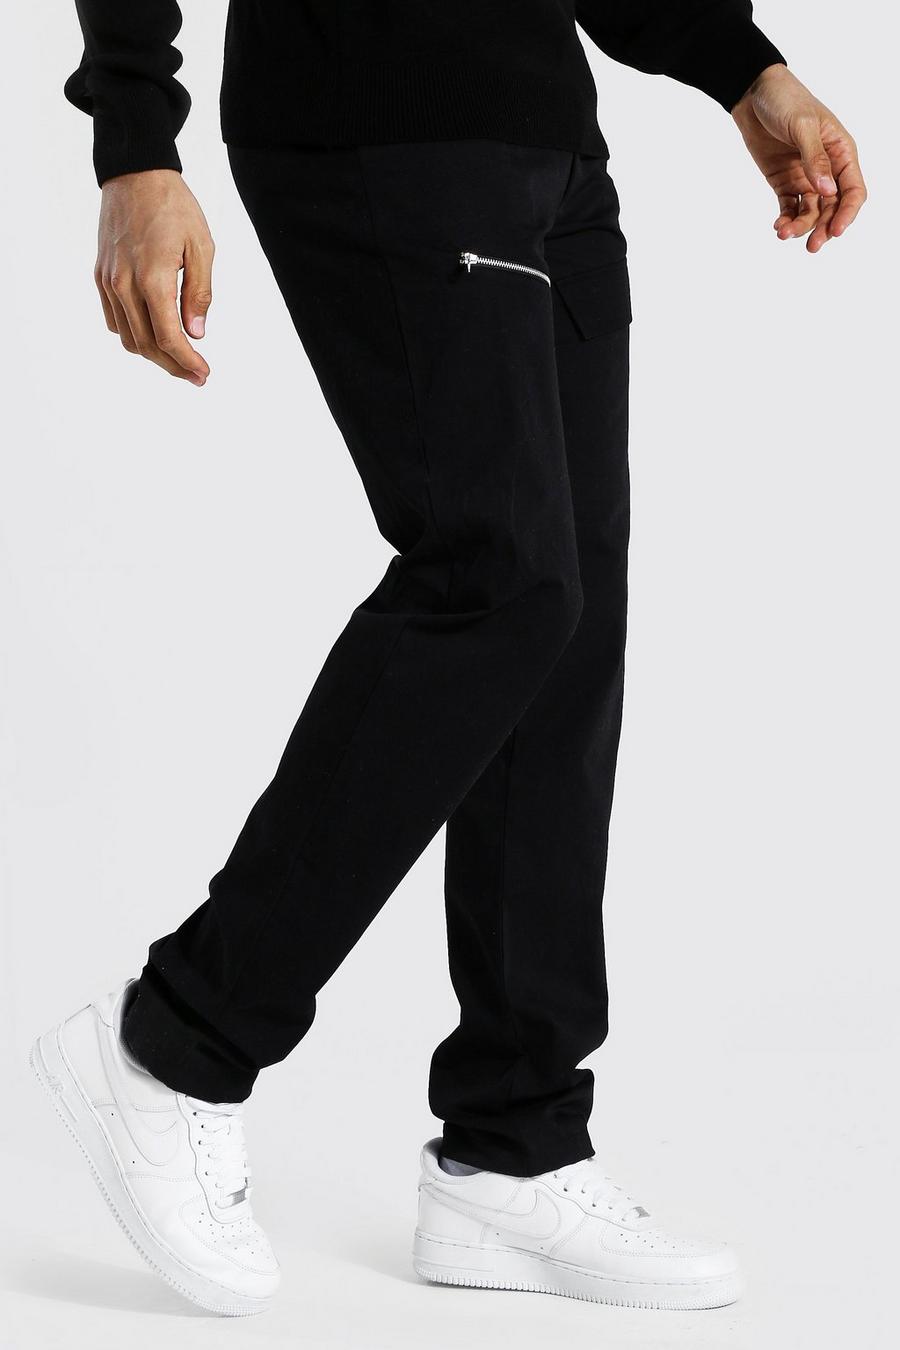 Black Tall Straight Leg Trousers With Front Pockets image number 1